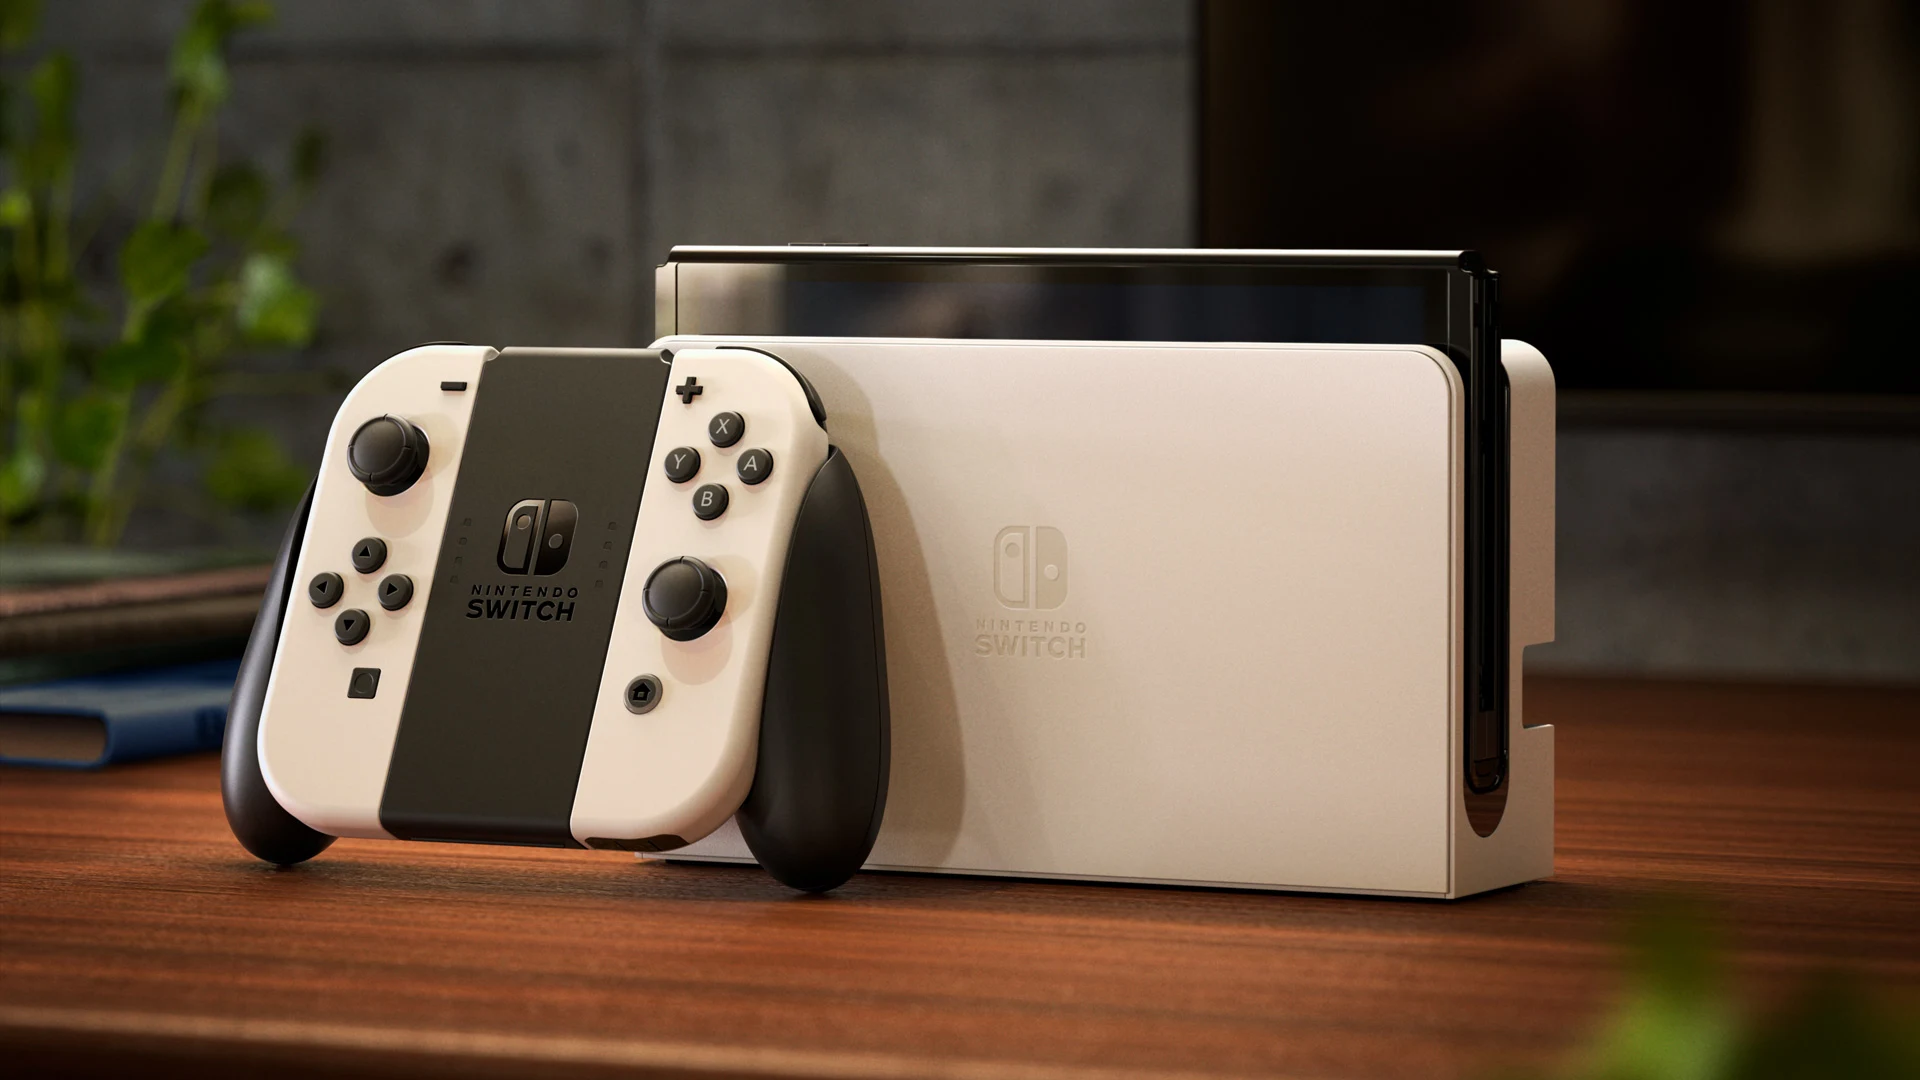 Switch (OLED model) announced: A console that falls short of the long-awaited Switch Pro existing Switch owners little to upgrade - NotebookCheck.net News